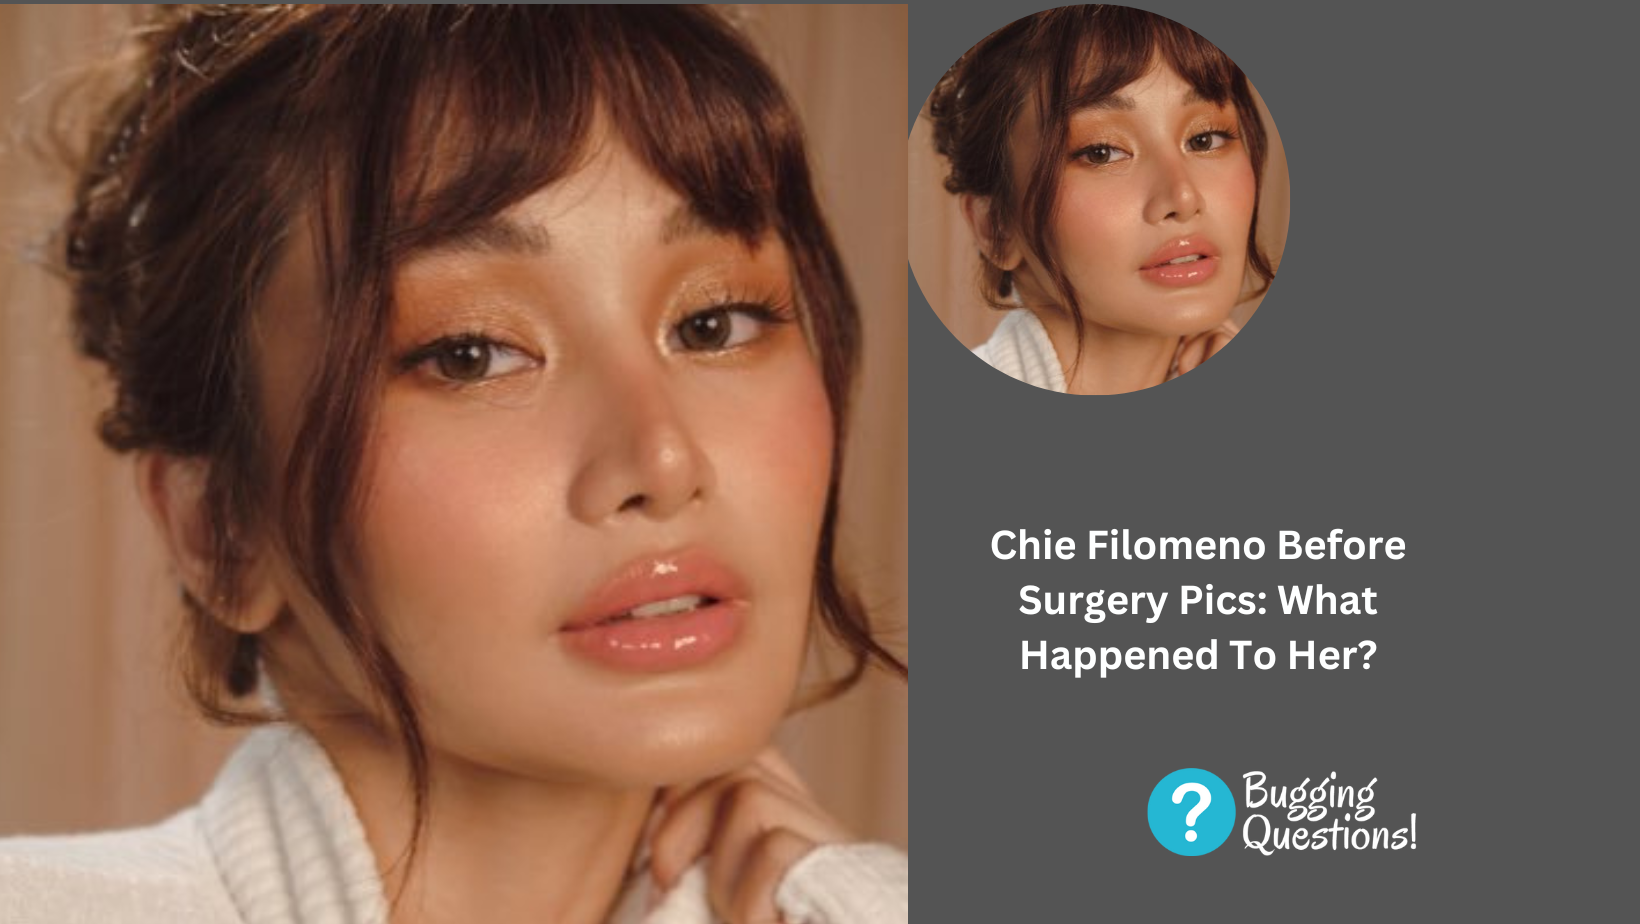 Chie Filomeno Before Surgery Pics: What Happened To Her?